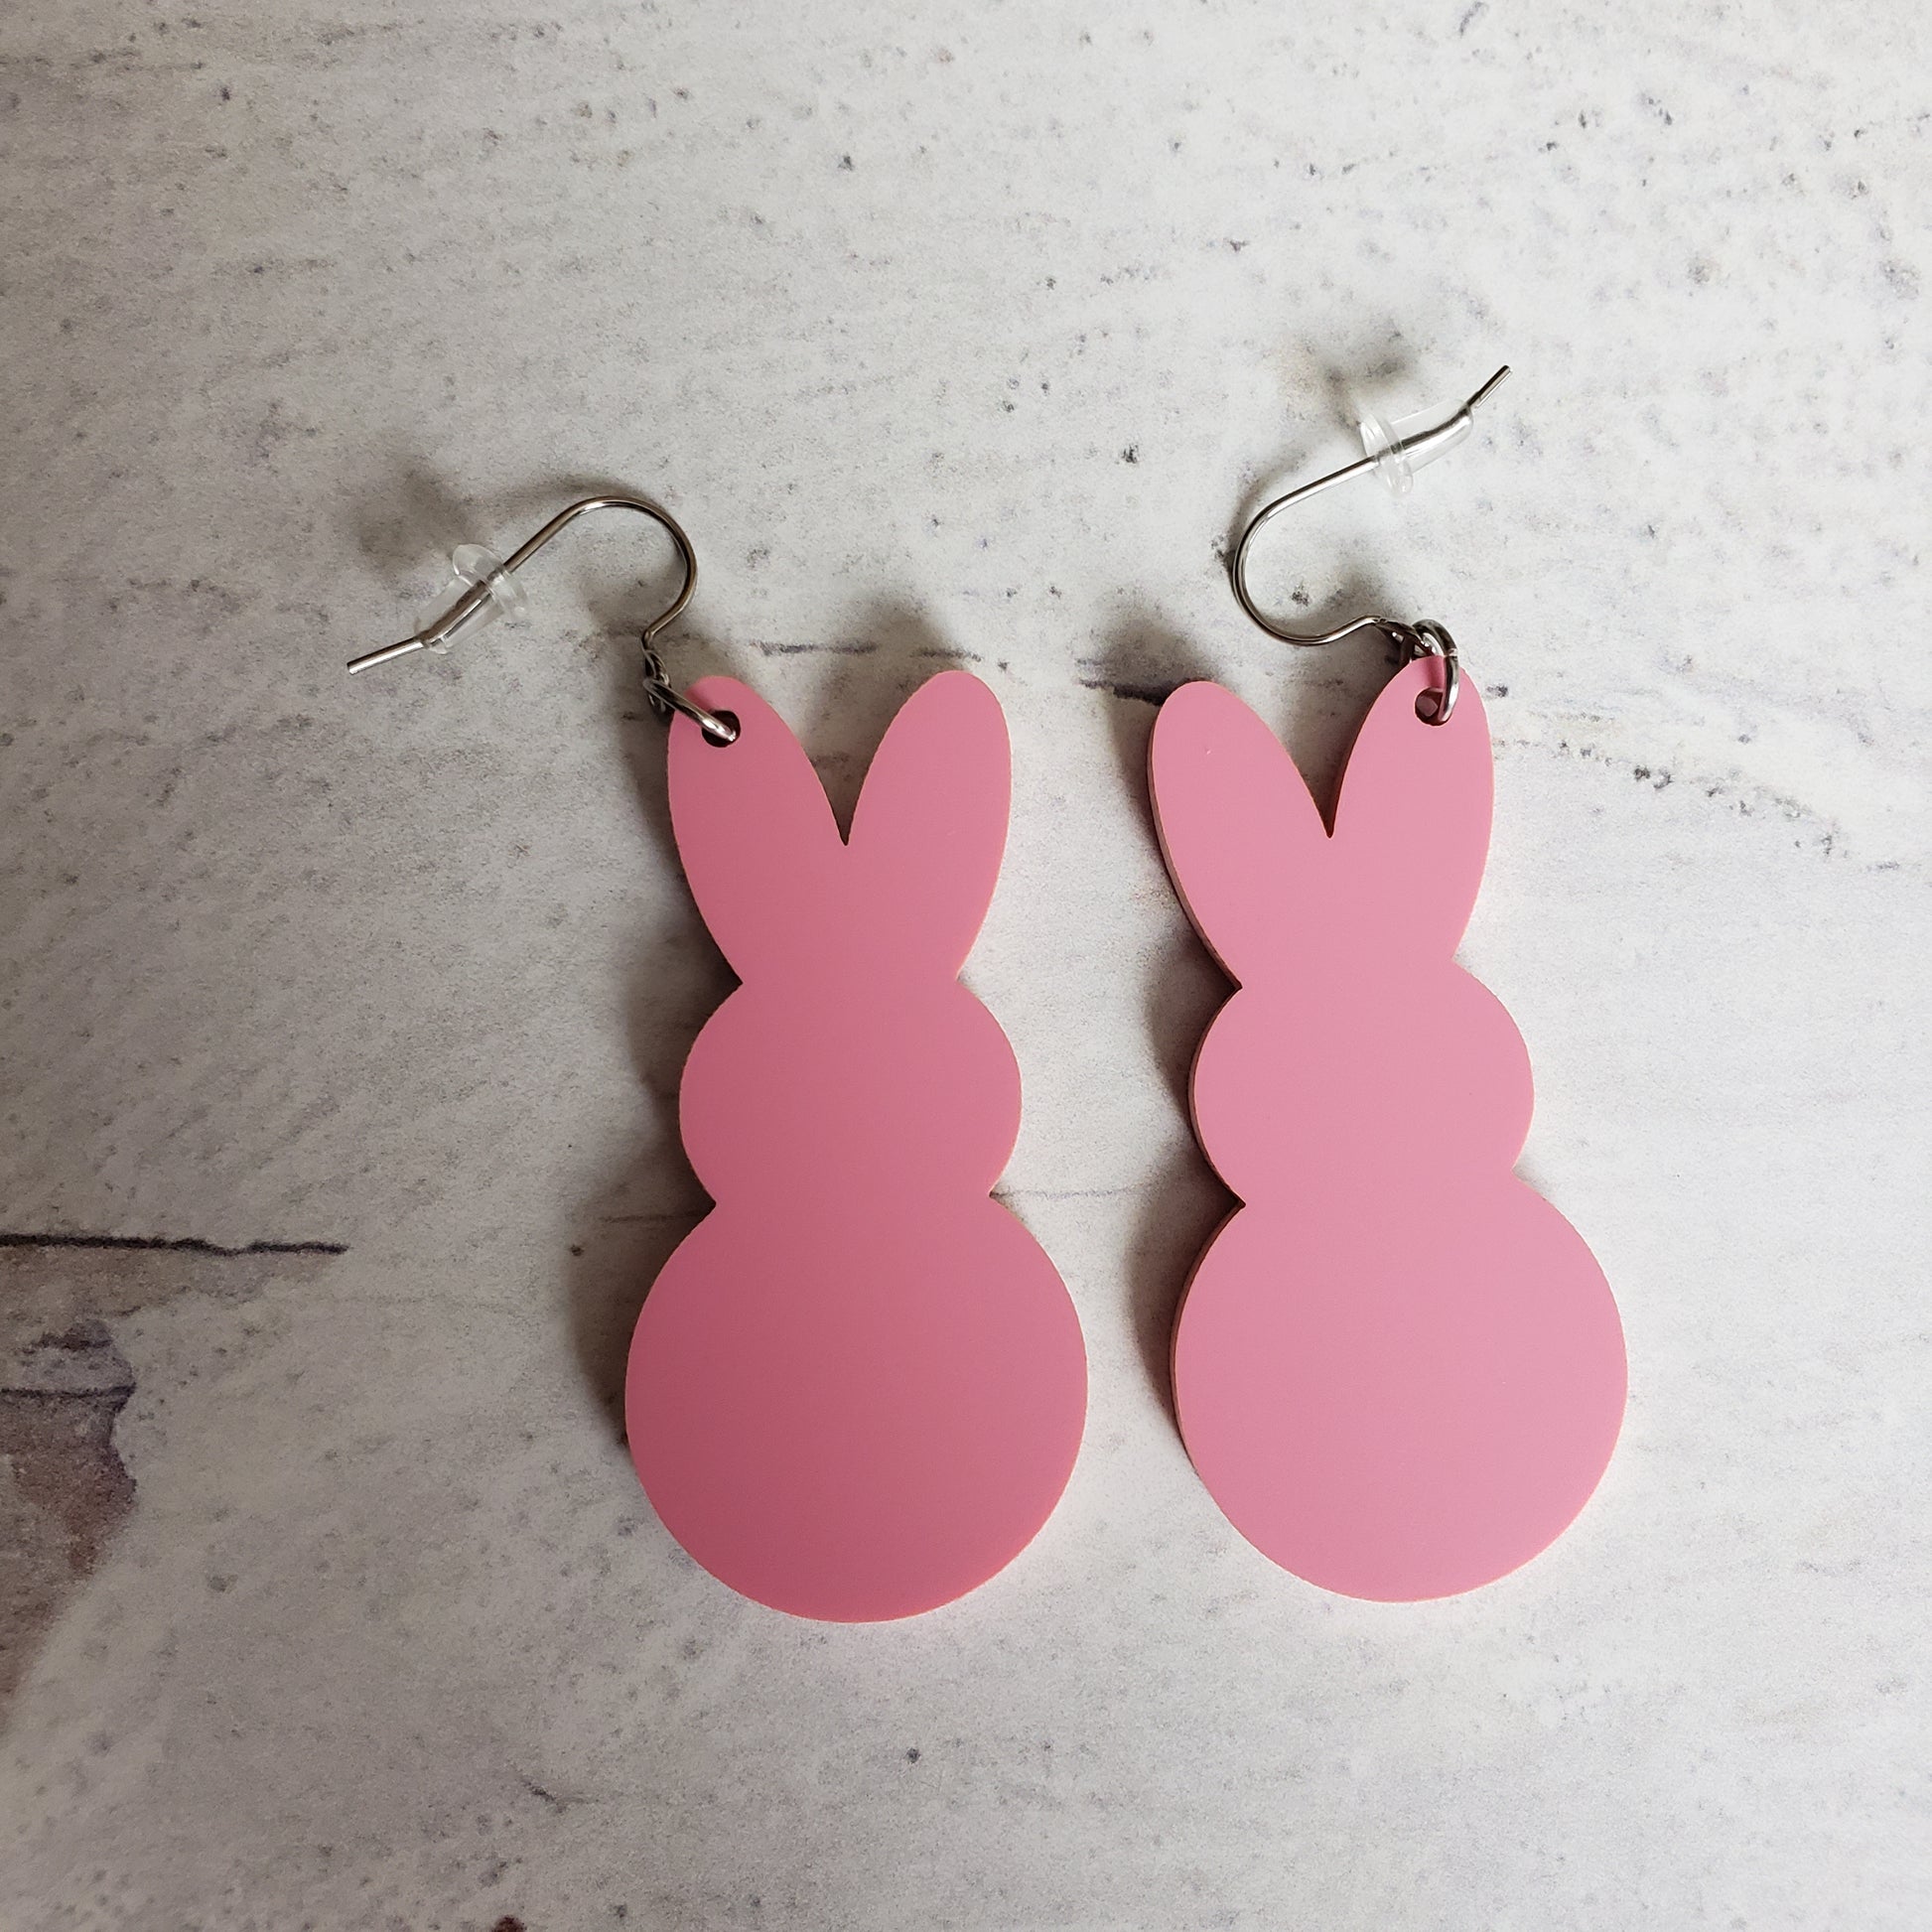 Backside of Matte Pink Marshmallow Bunny Earrings on stainless earring wires.